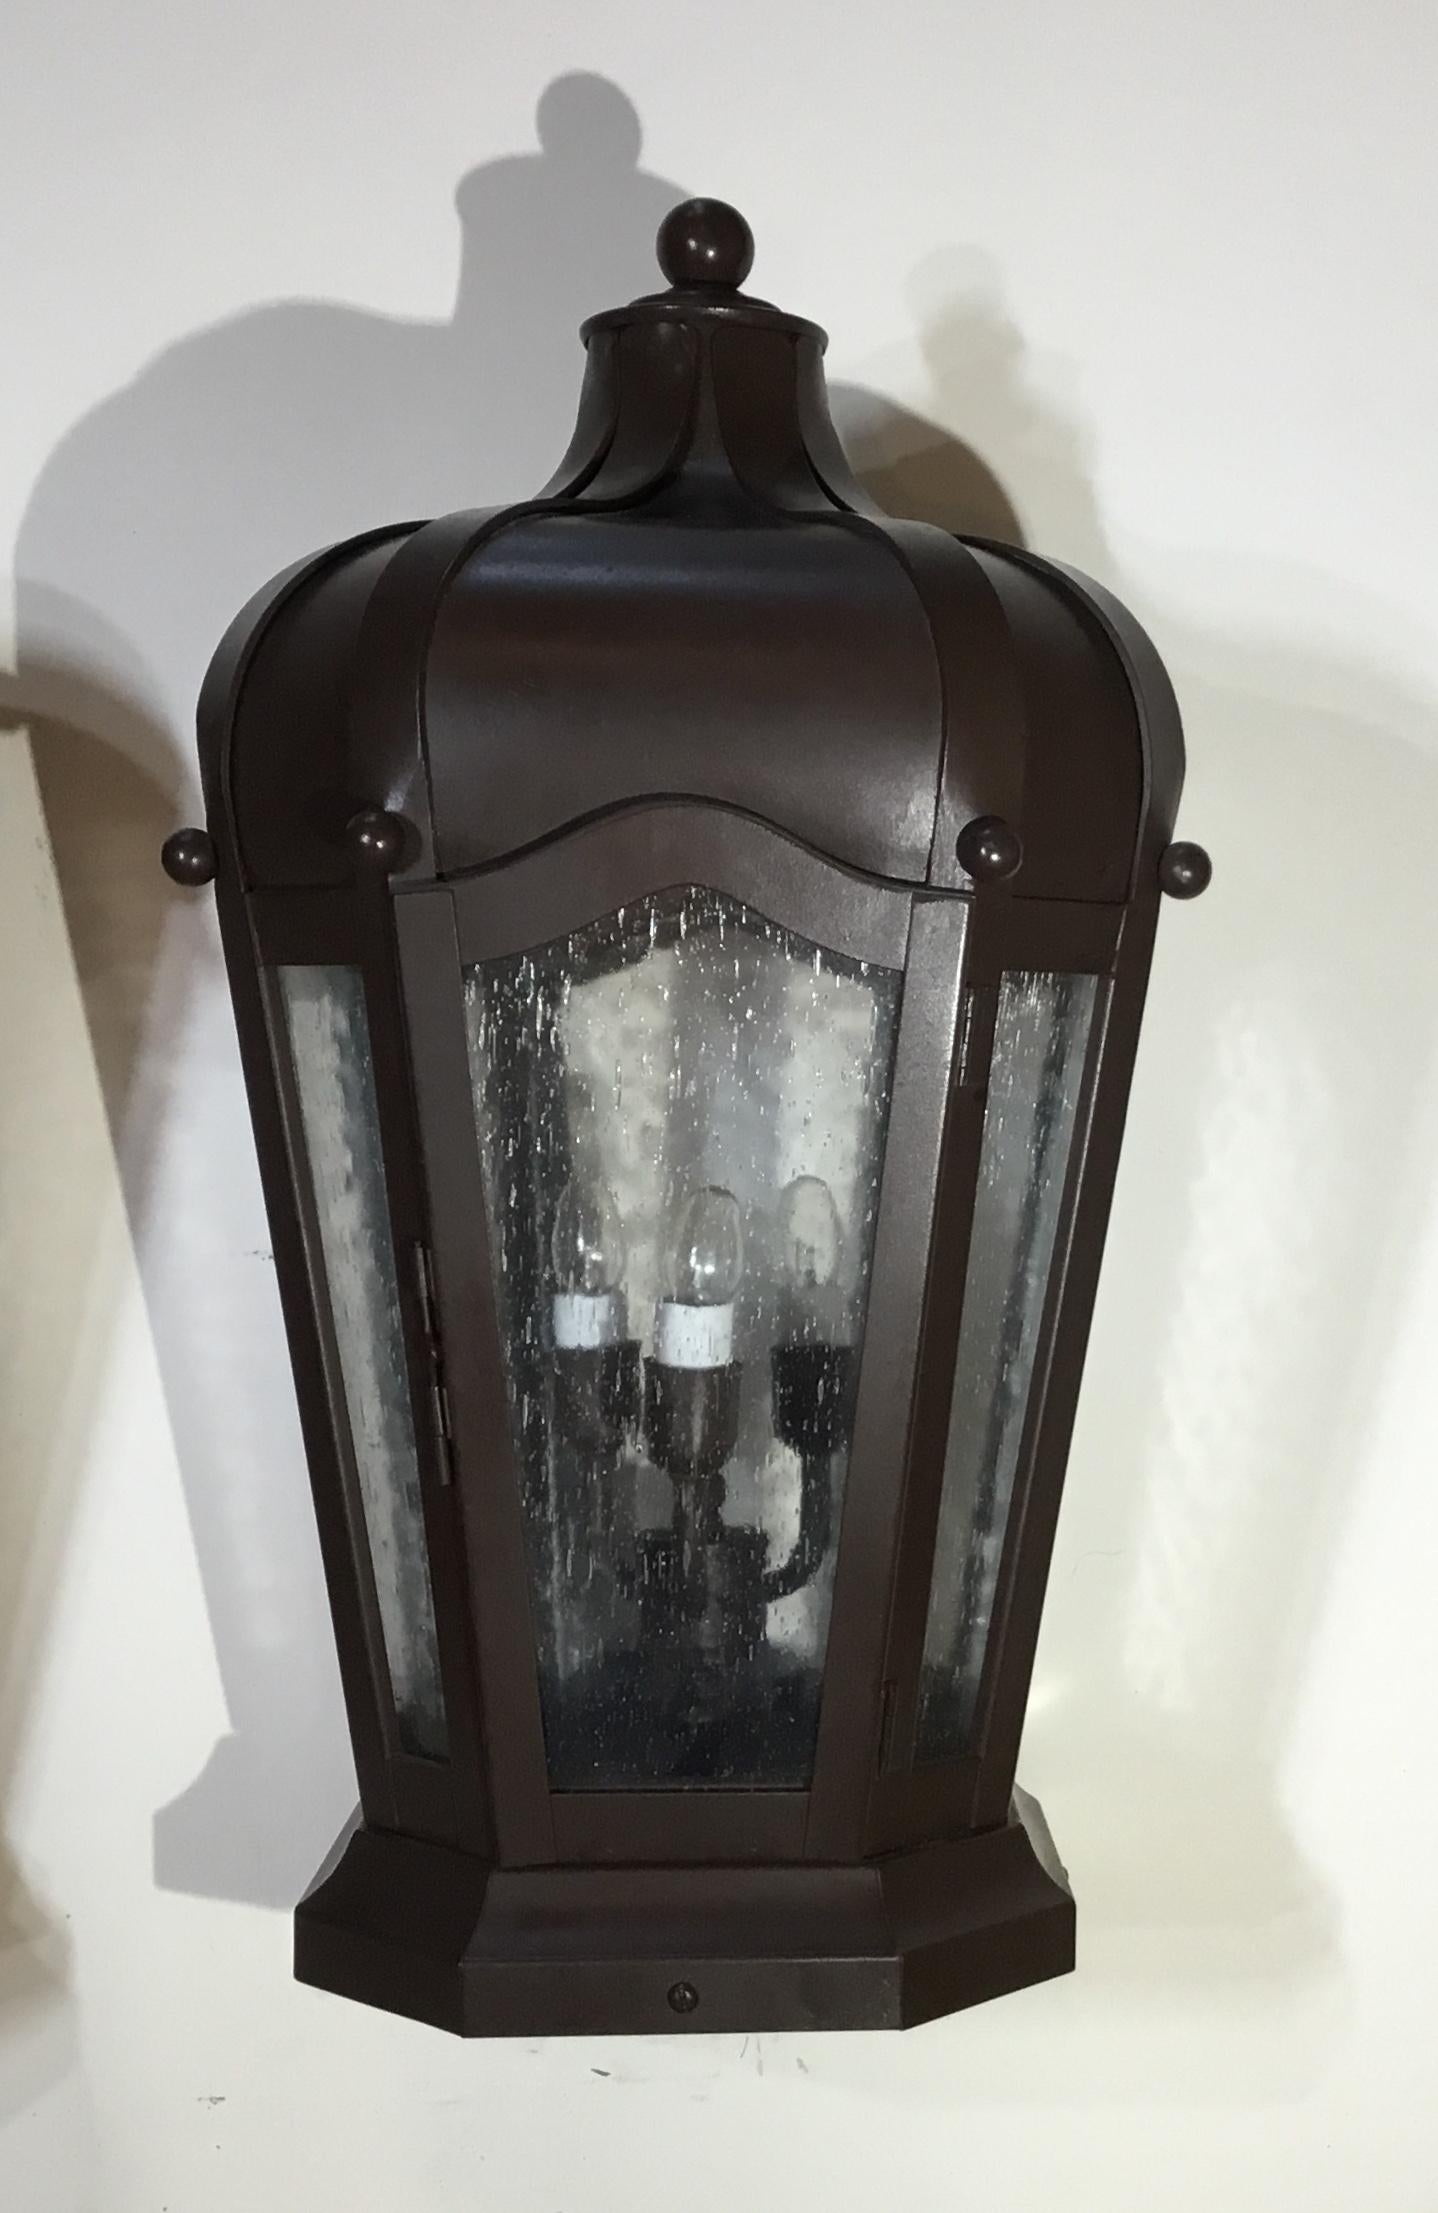 Decorative pair of post lantern artistically handcrafted from solid brass, seeded glass, with three 40/watt lights each, suitable for wet locations up to US Code very easy installation, professional brown finish.
Base size: 9” x 9”.